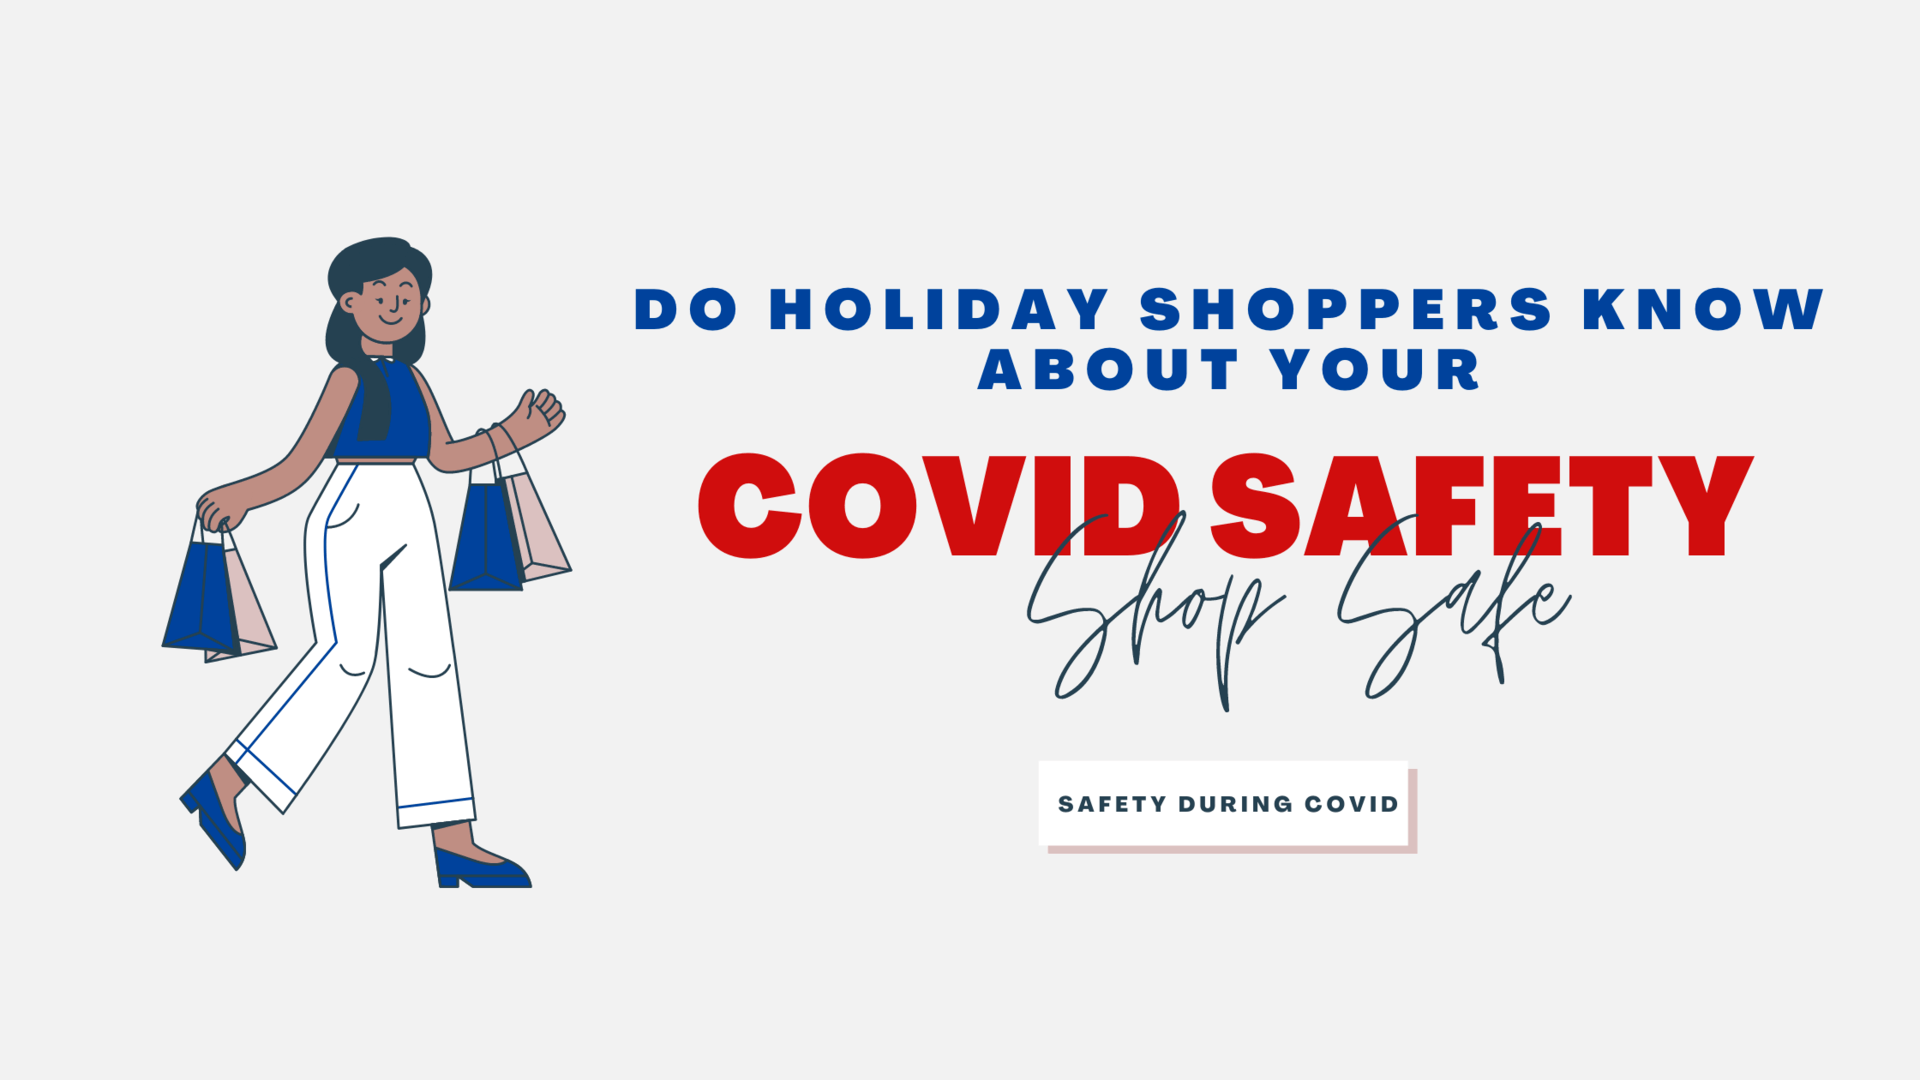 Do holiday shoppers know about your Covid safety measures?